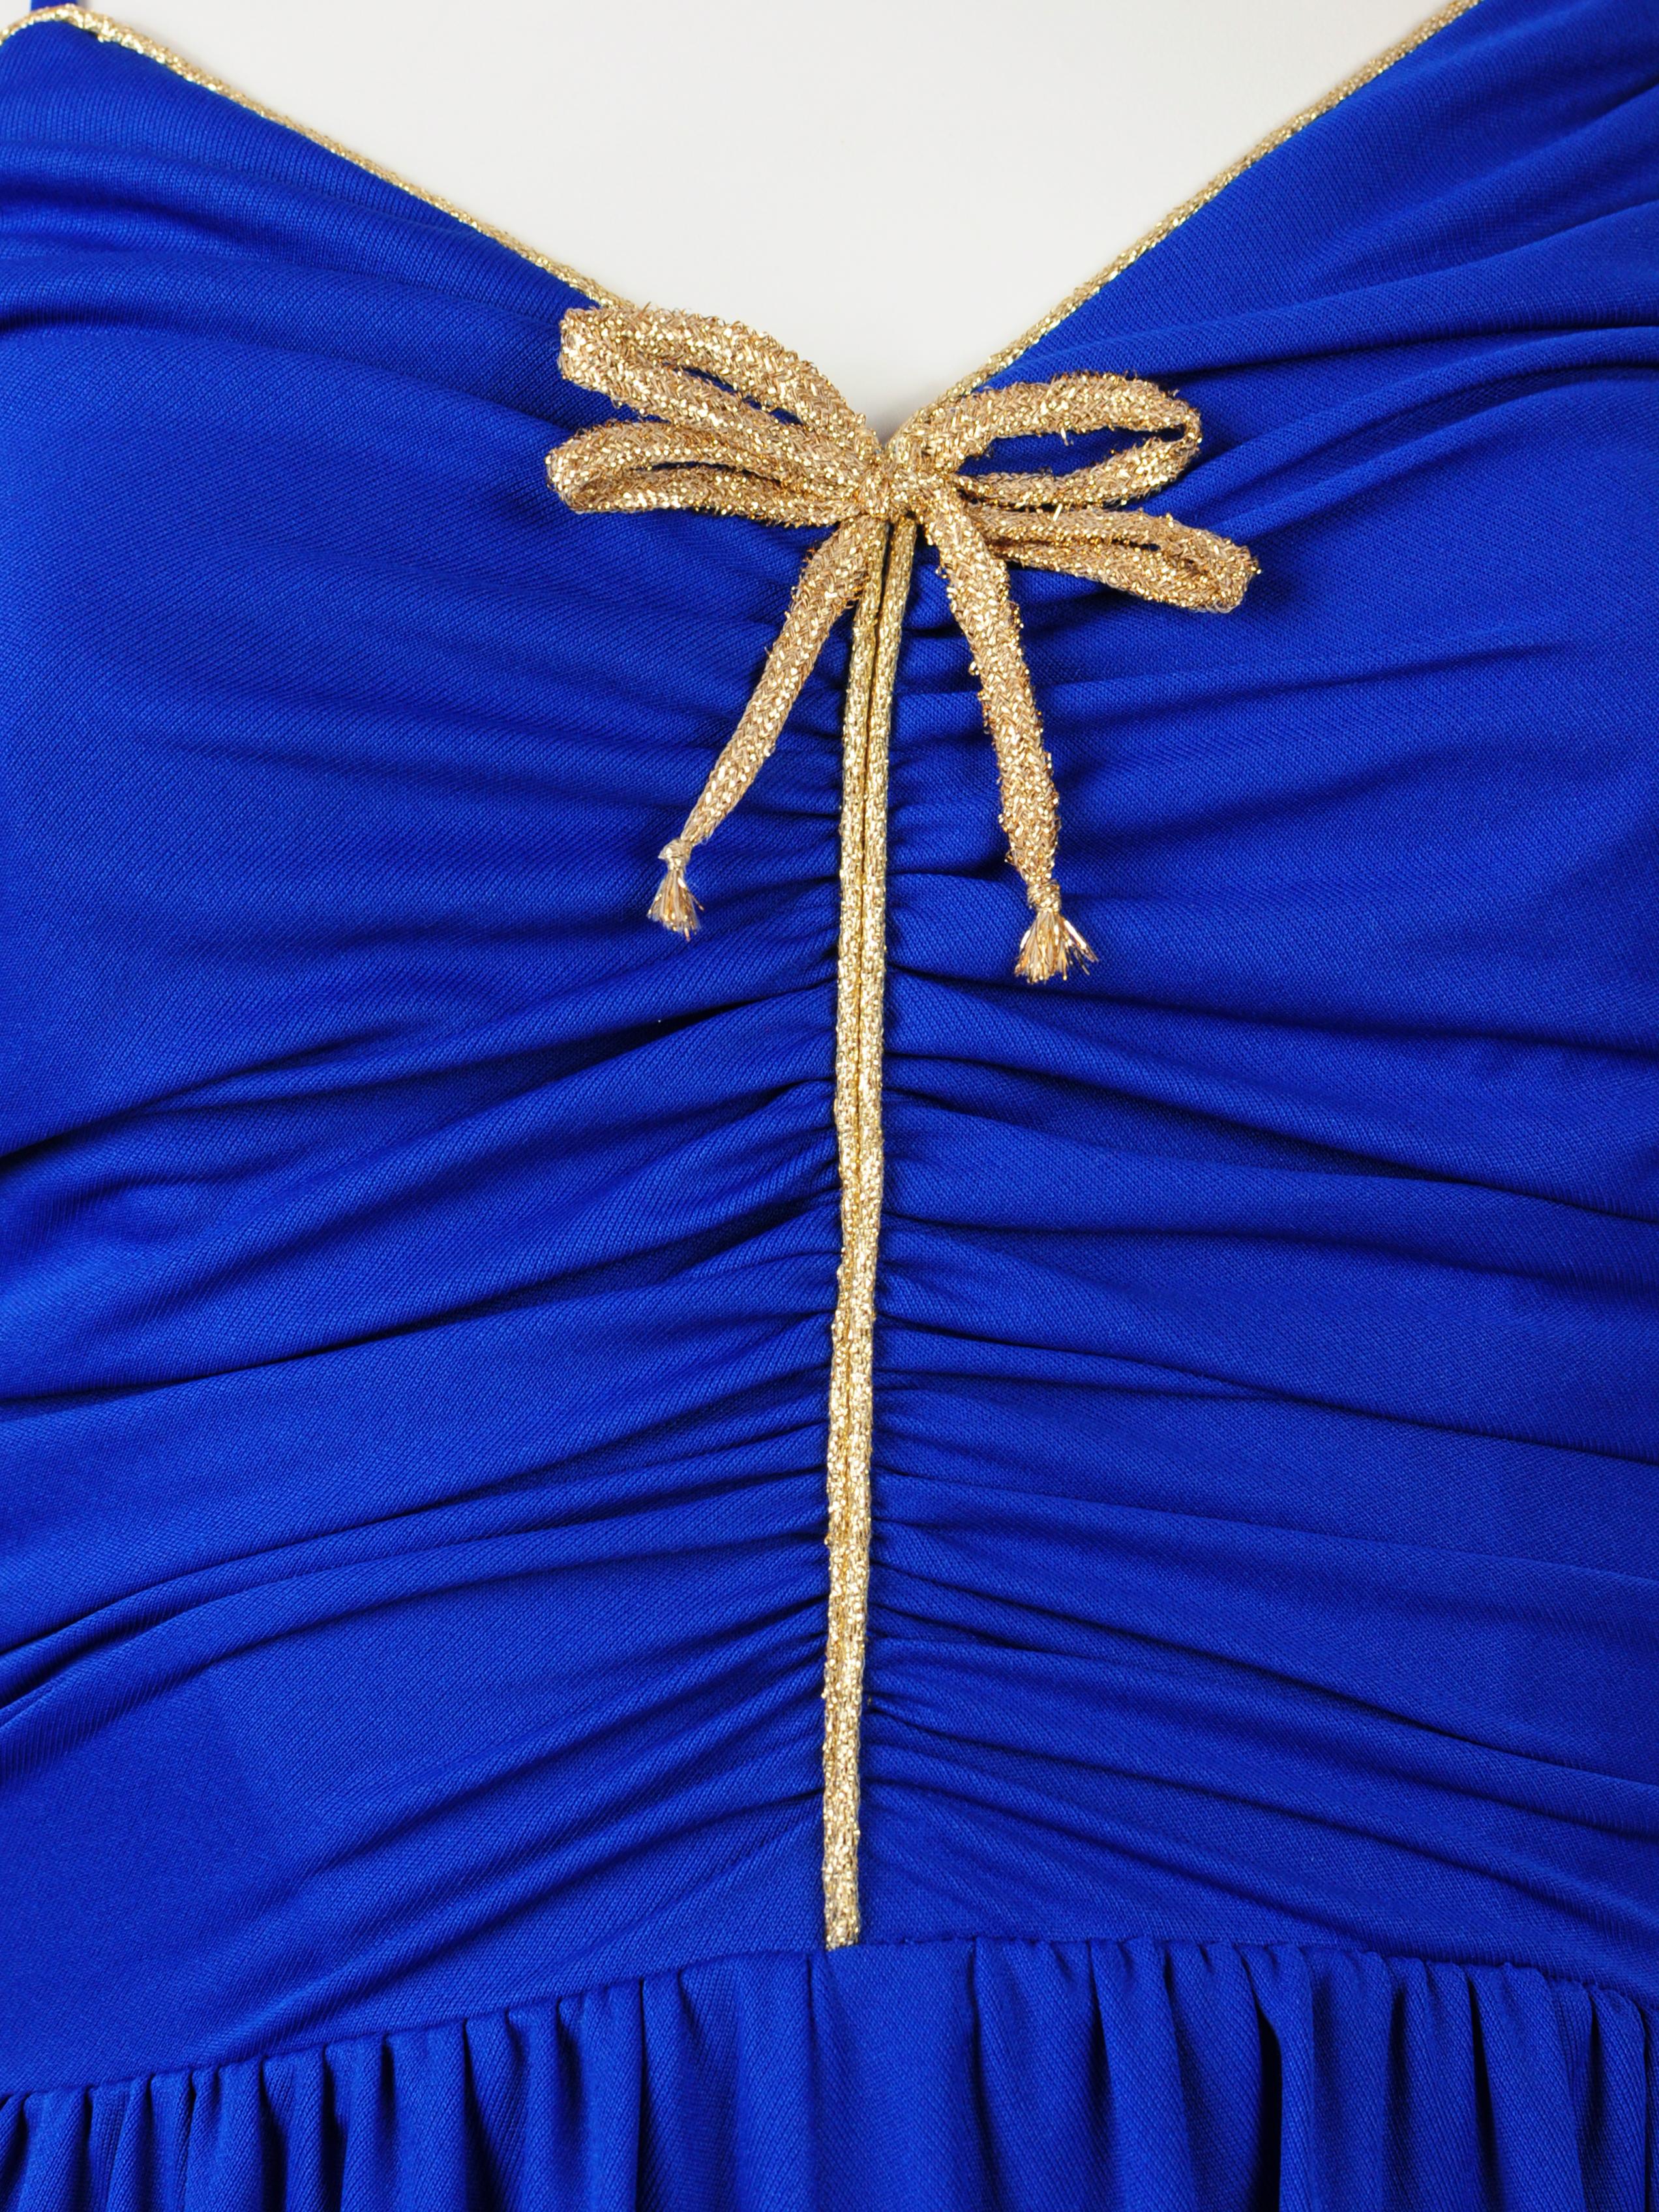 Trina Lewis Marjon Couture Maxi Dress Royal Blue Gold Bow 1970s For Sale 1